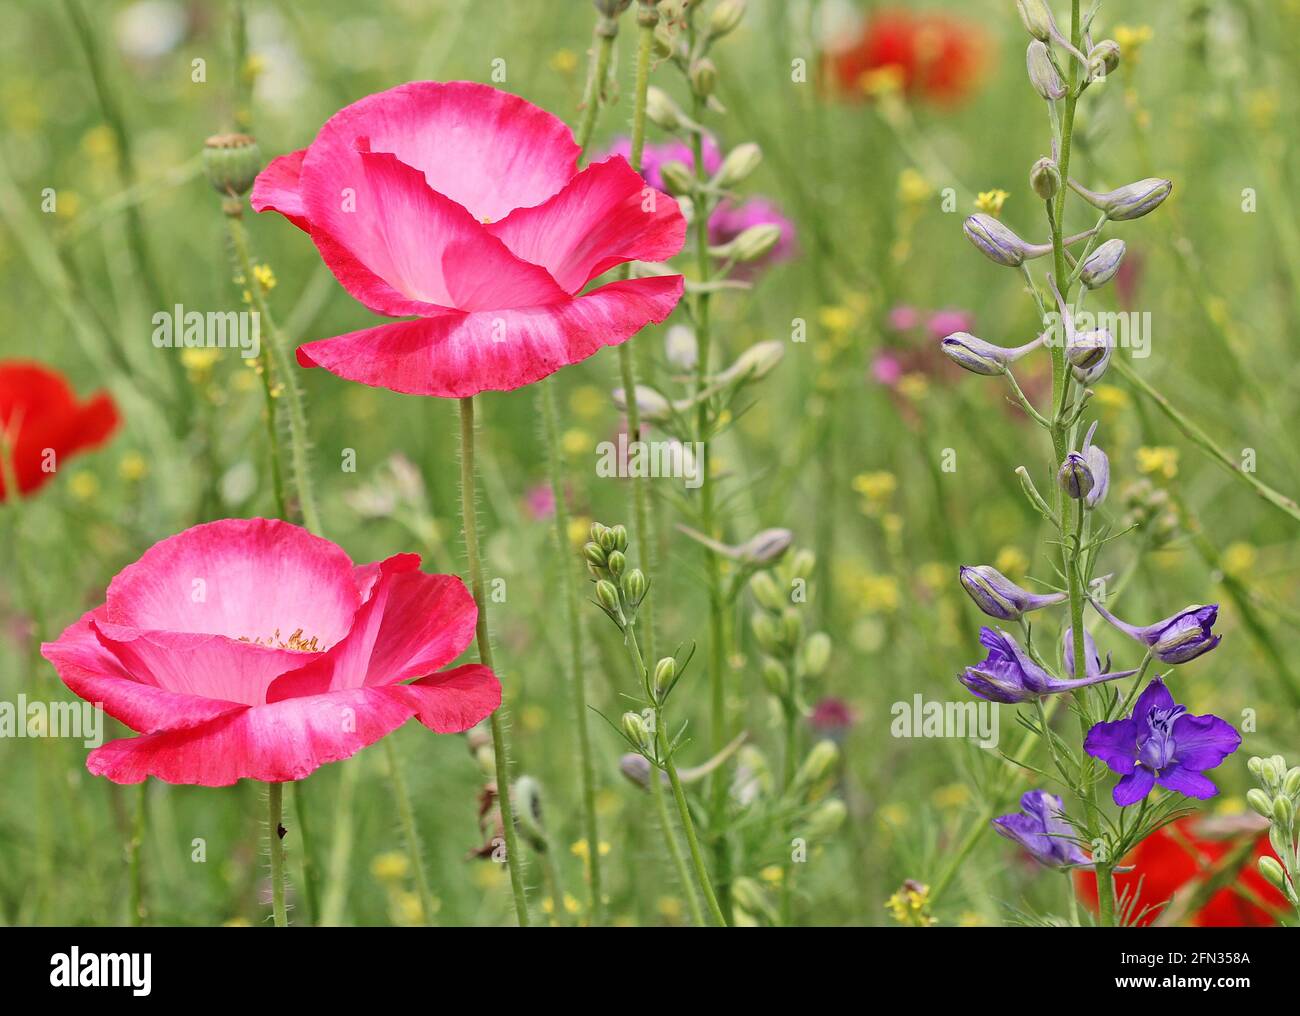 Close up image with poppy and larkspur Stock Photo